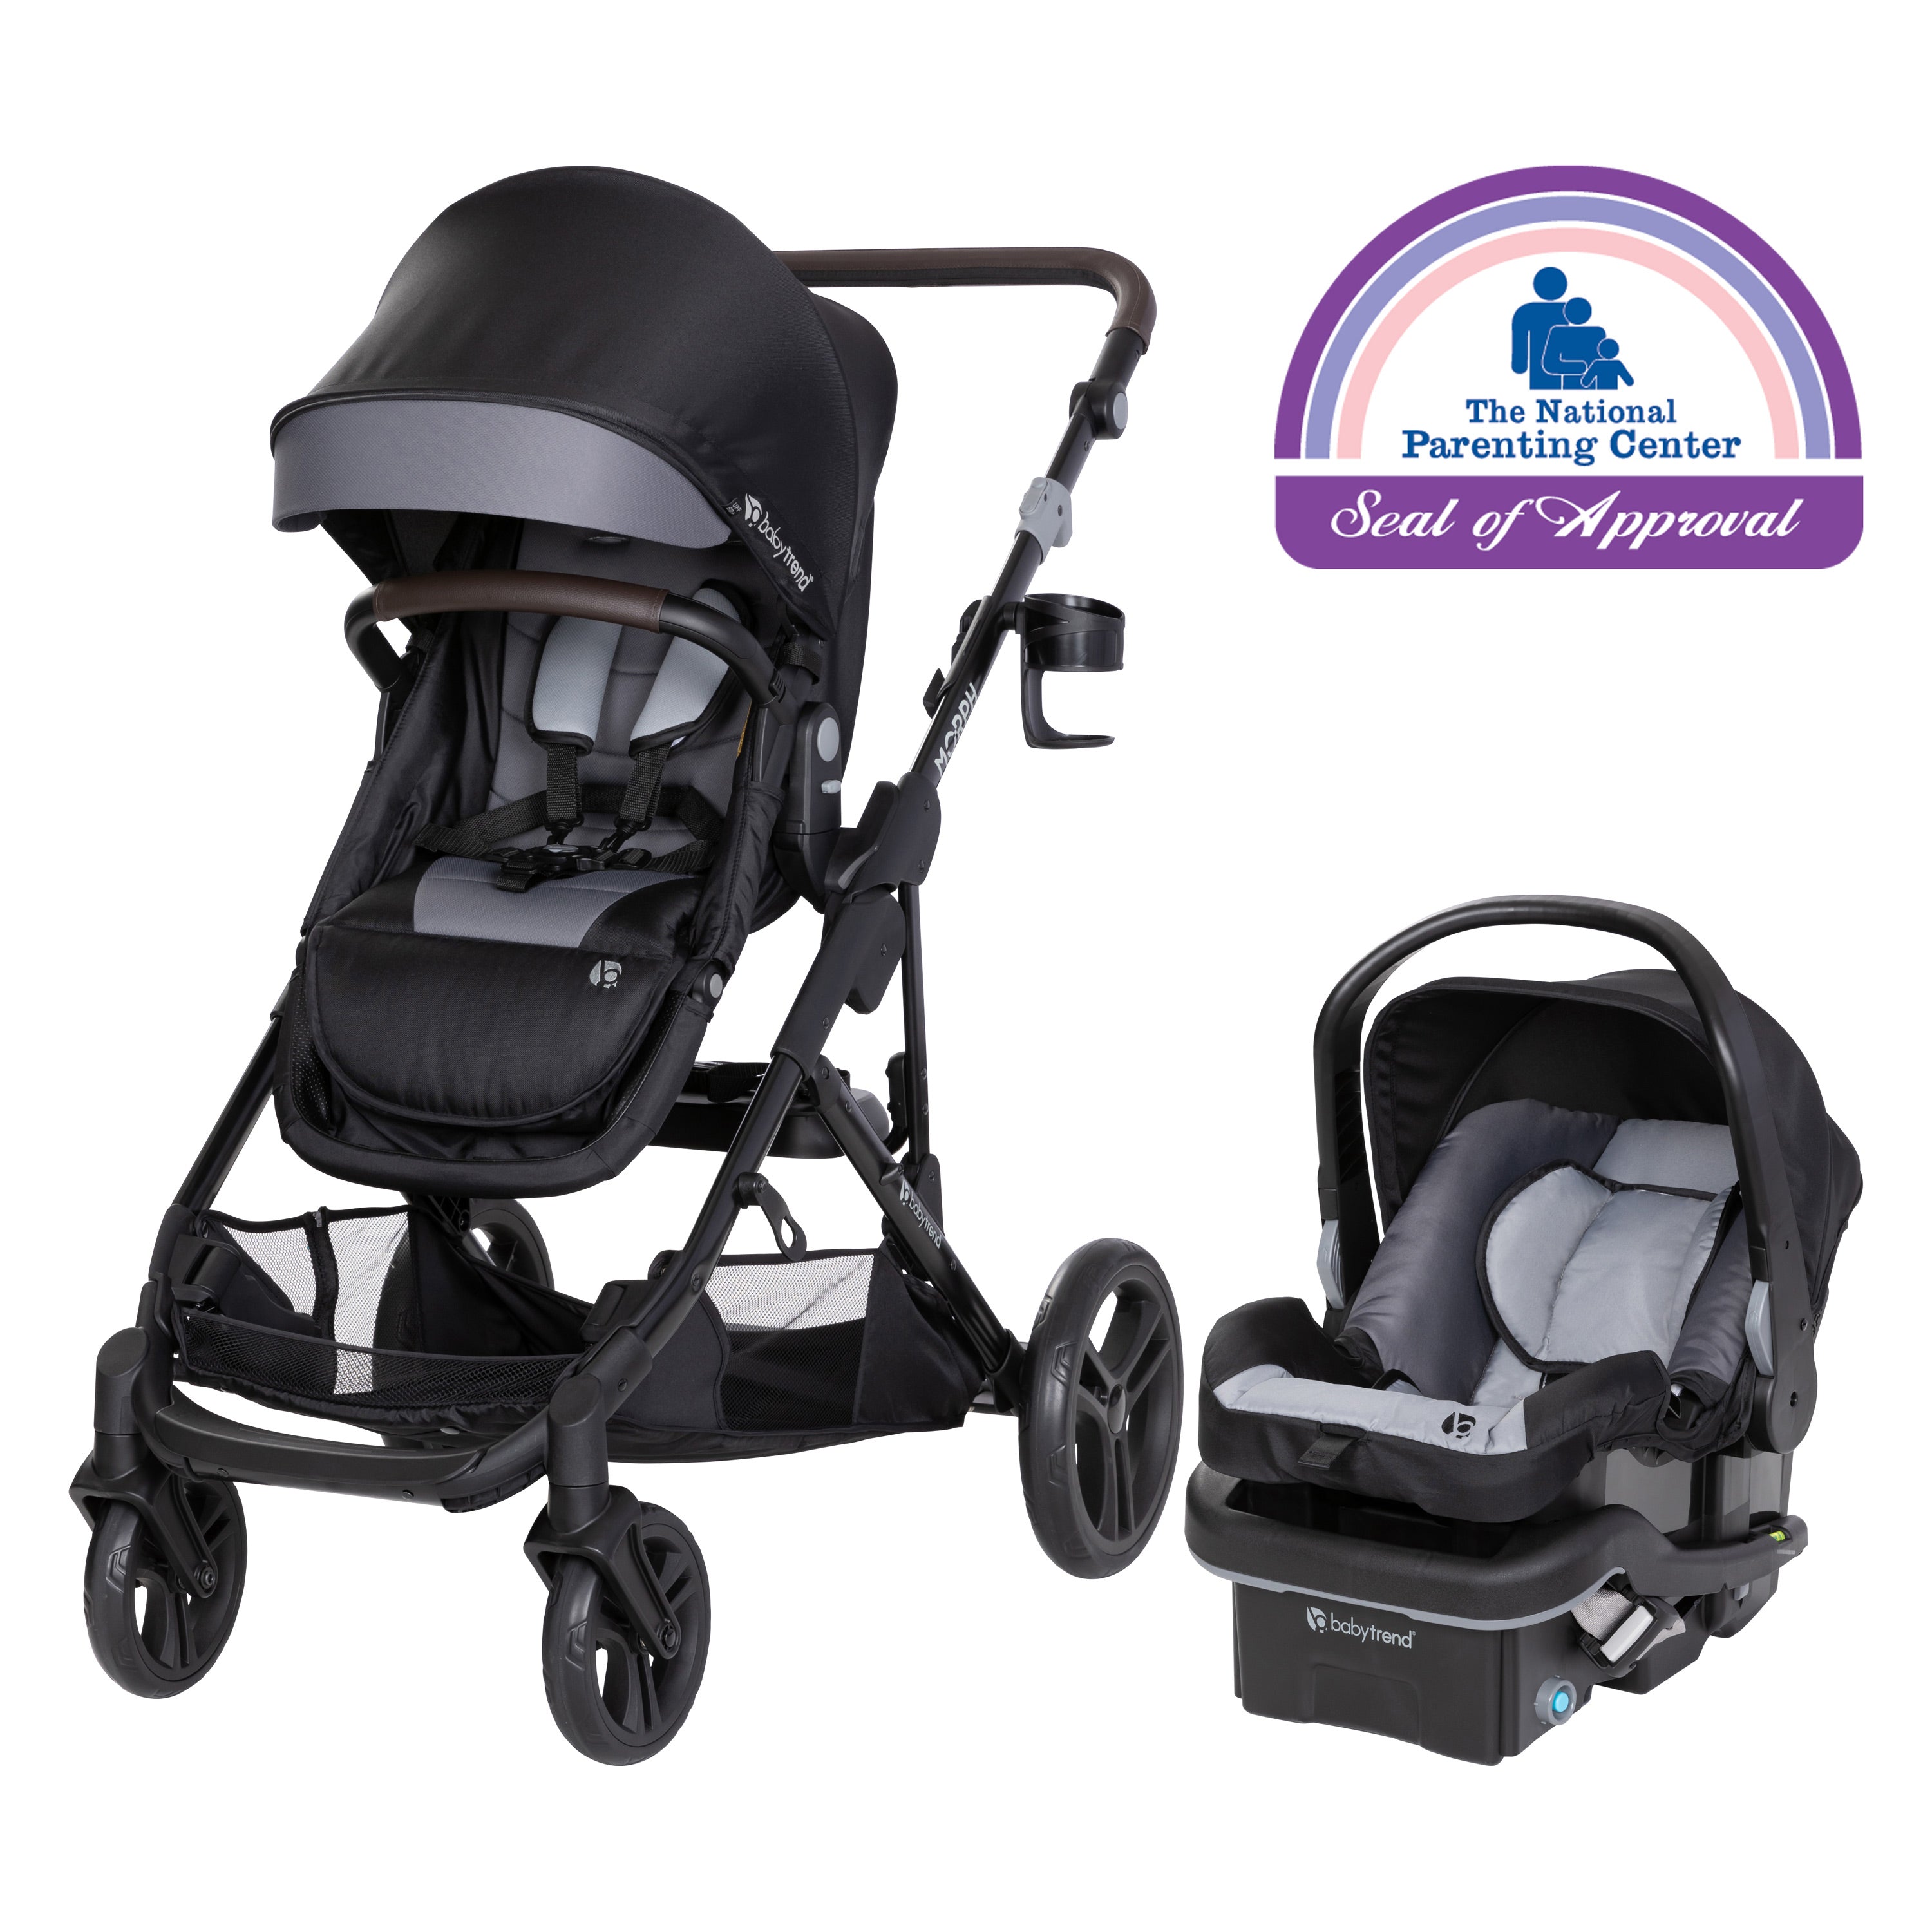 Baby Trend Morph Single to Double Modular Stroller Travel System with EZ-Lift 35 PLUS Infant Car Seat